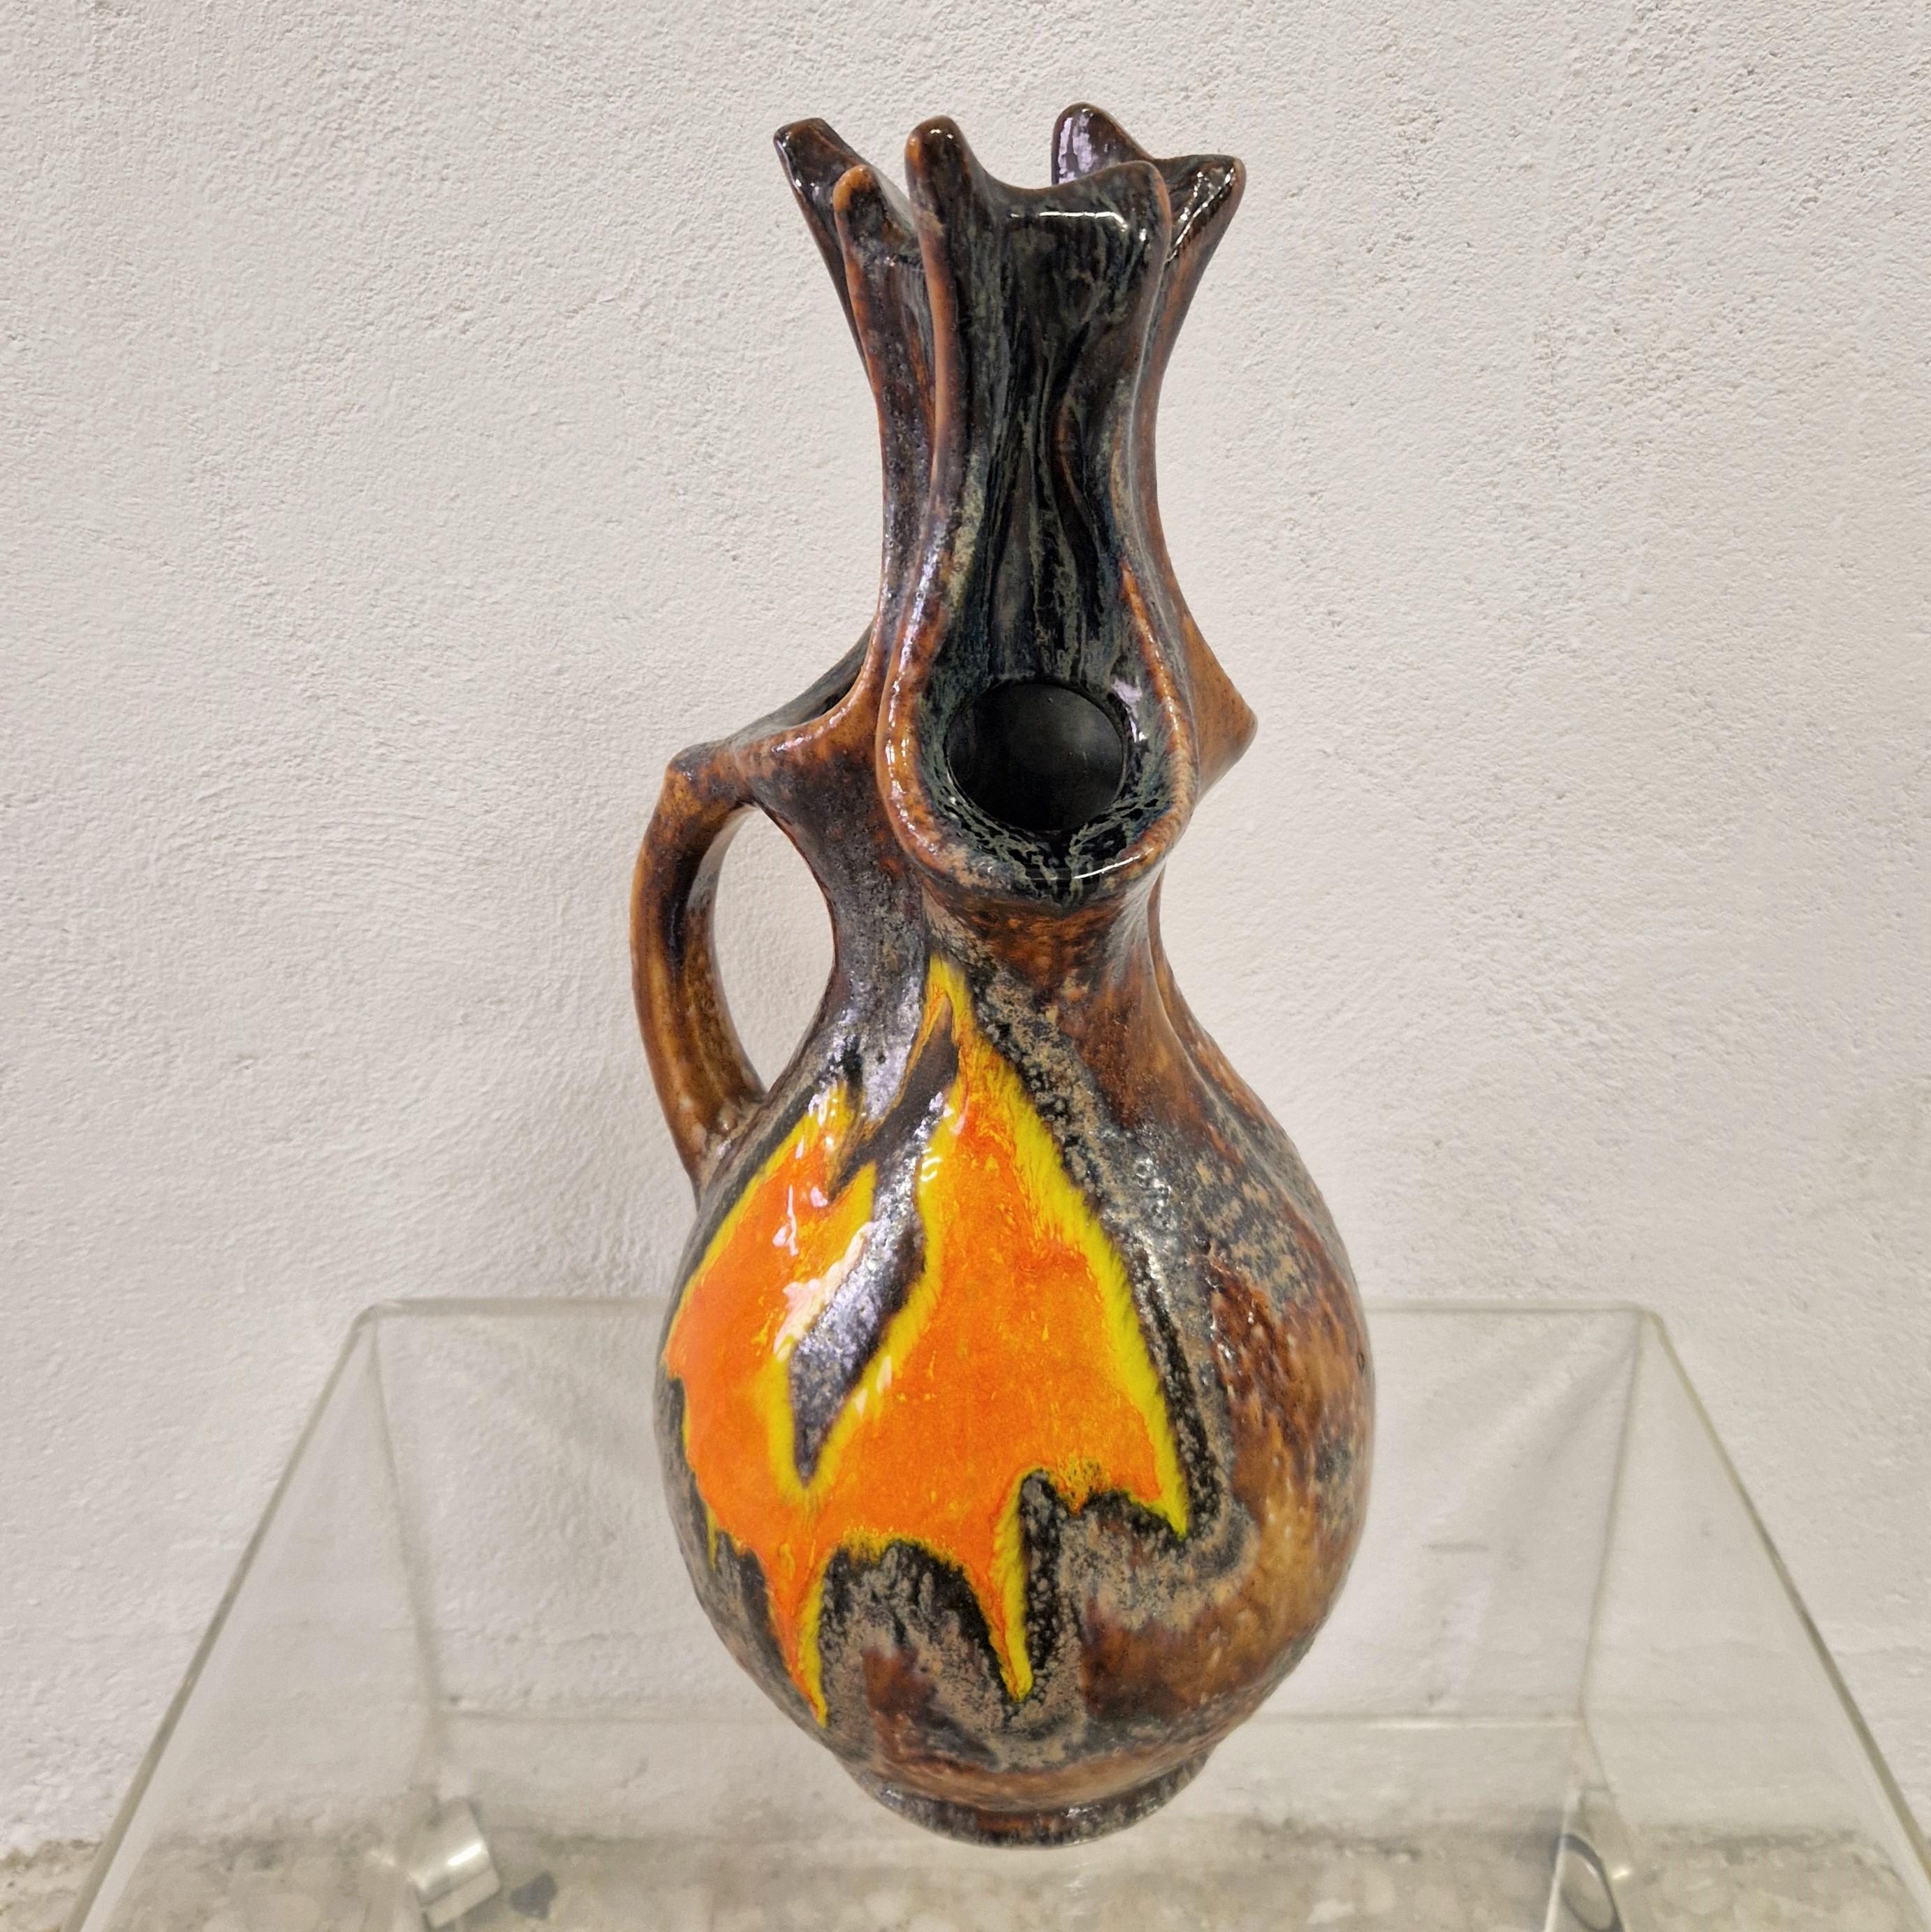 Very rare vase with different openings